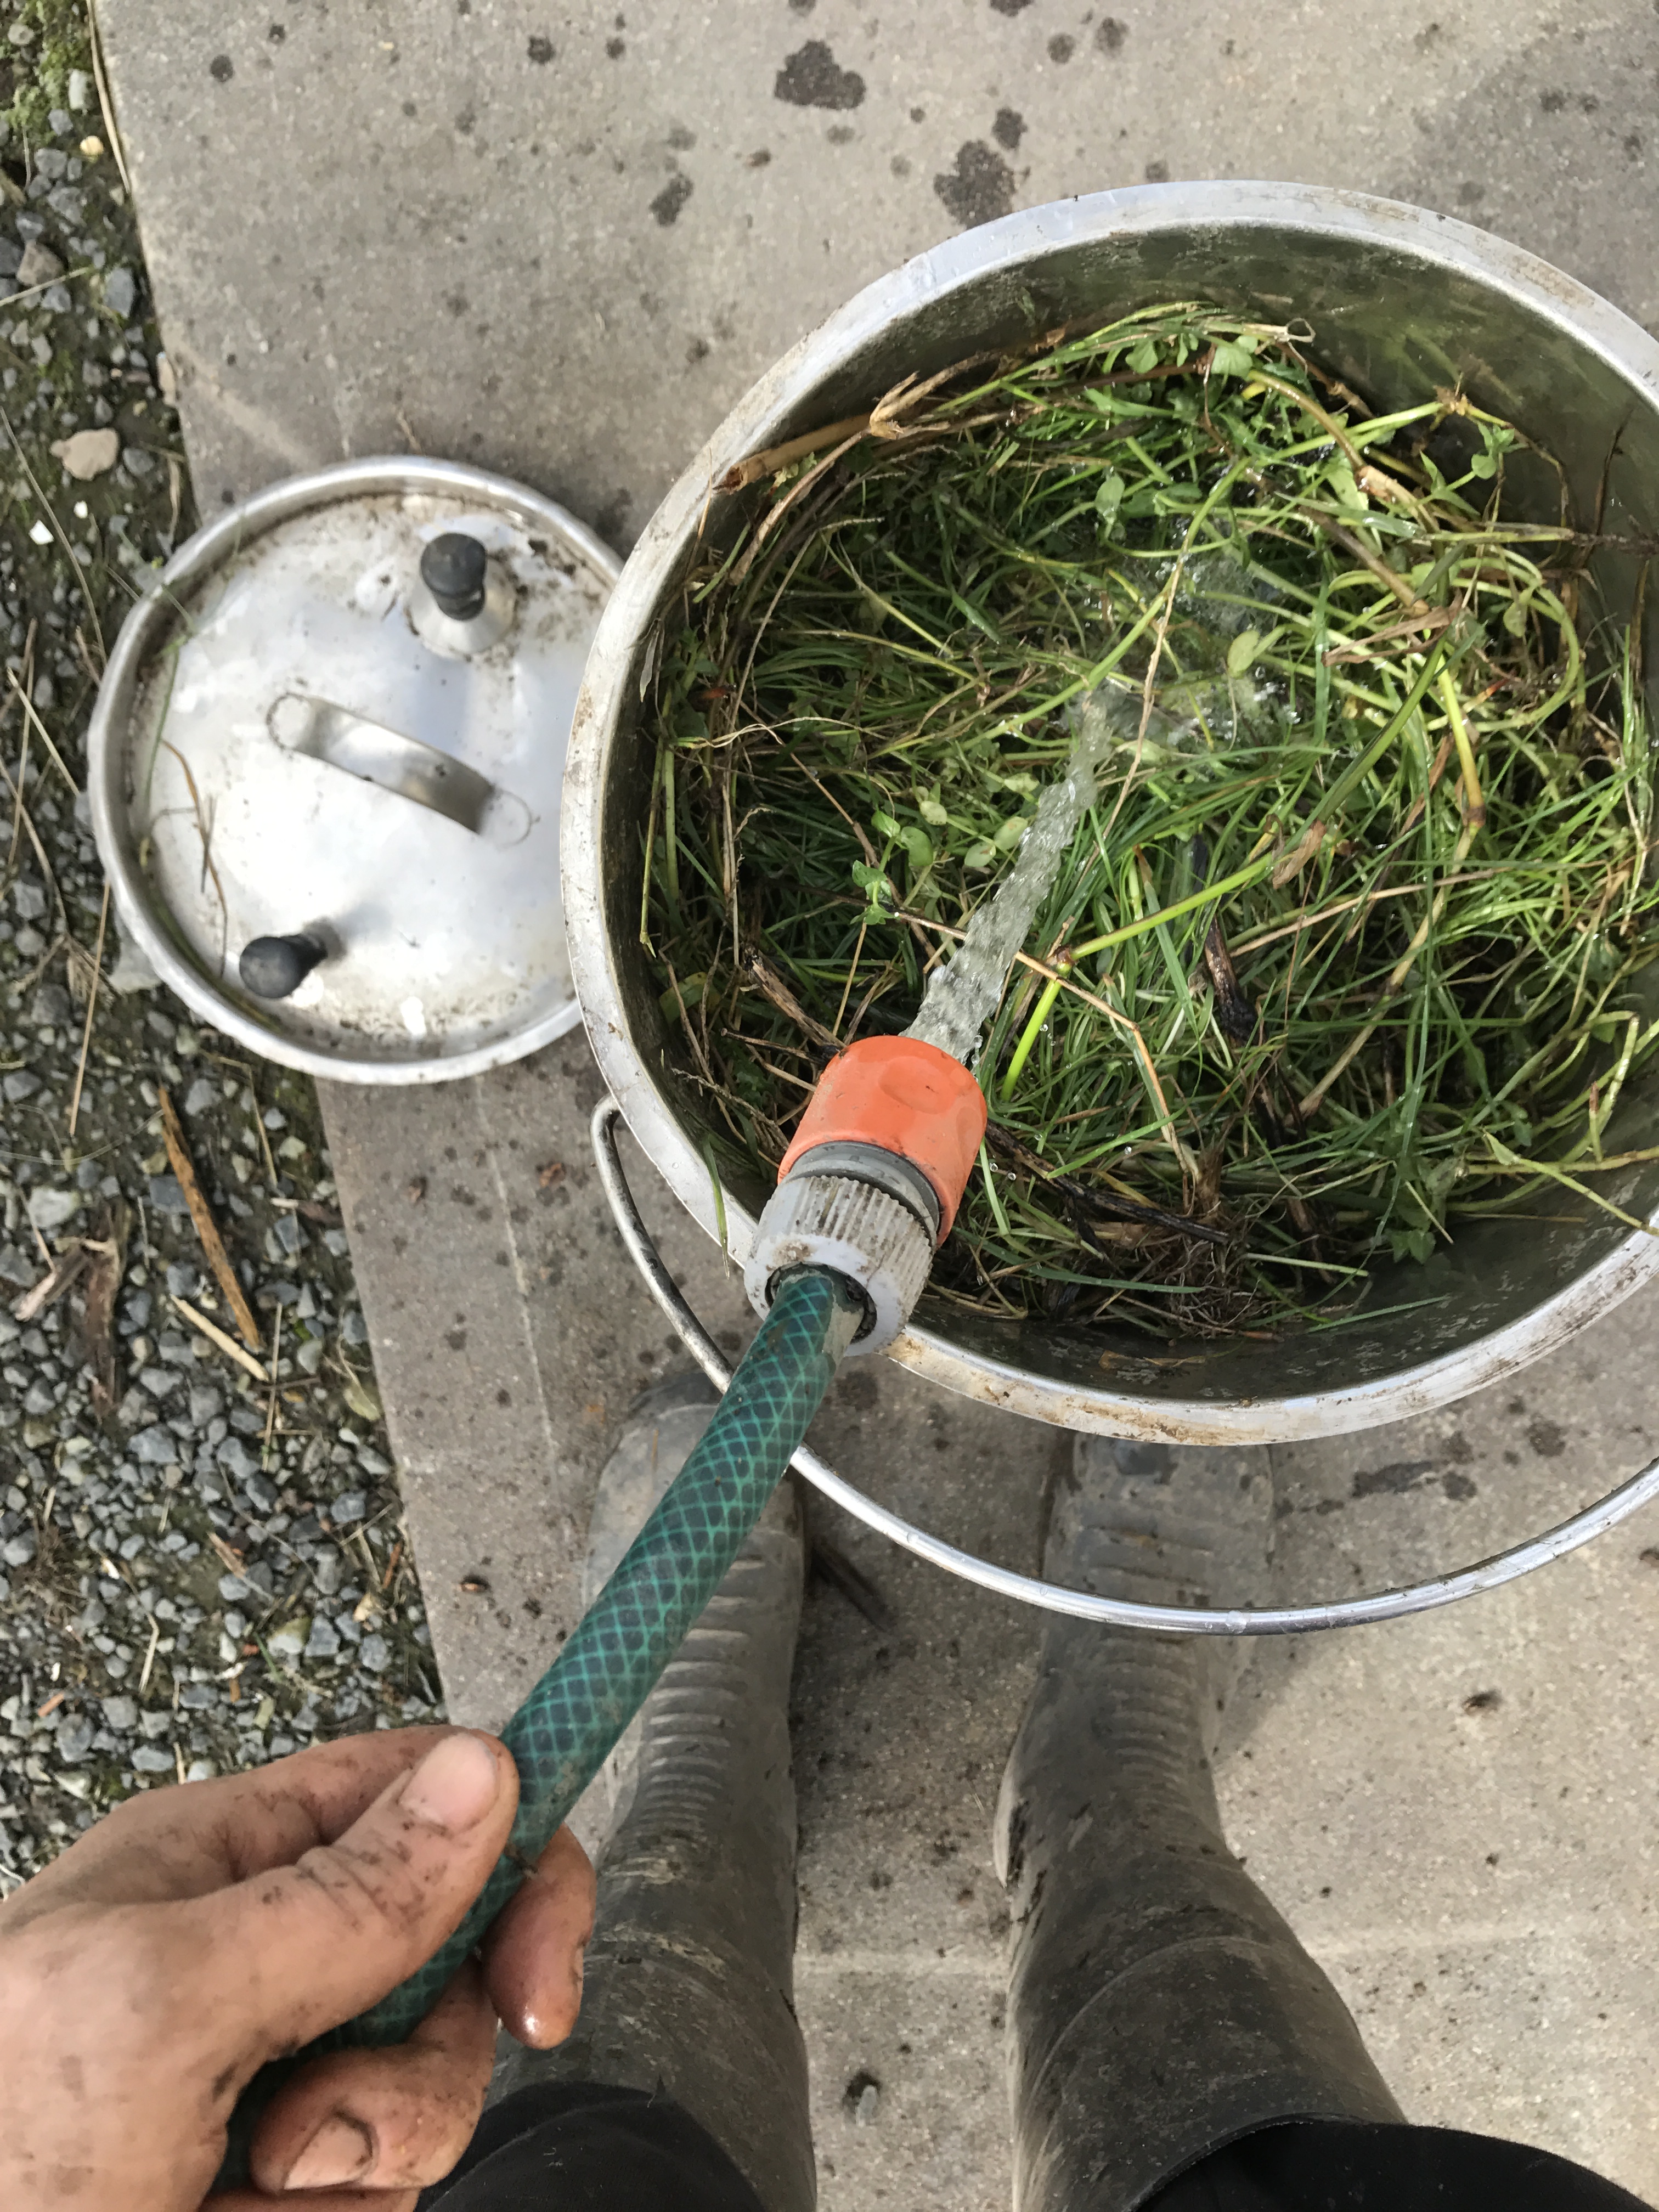 Making weed tea - filling bucket of weeds with water